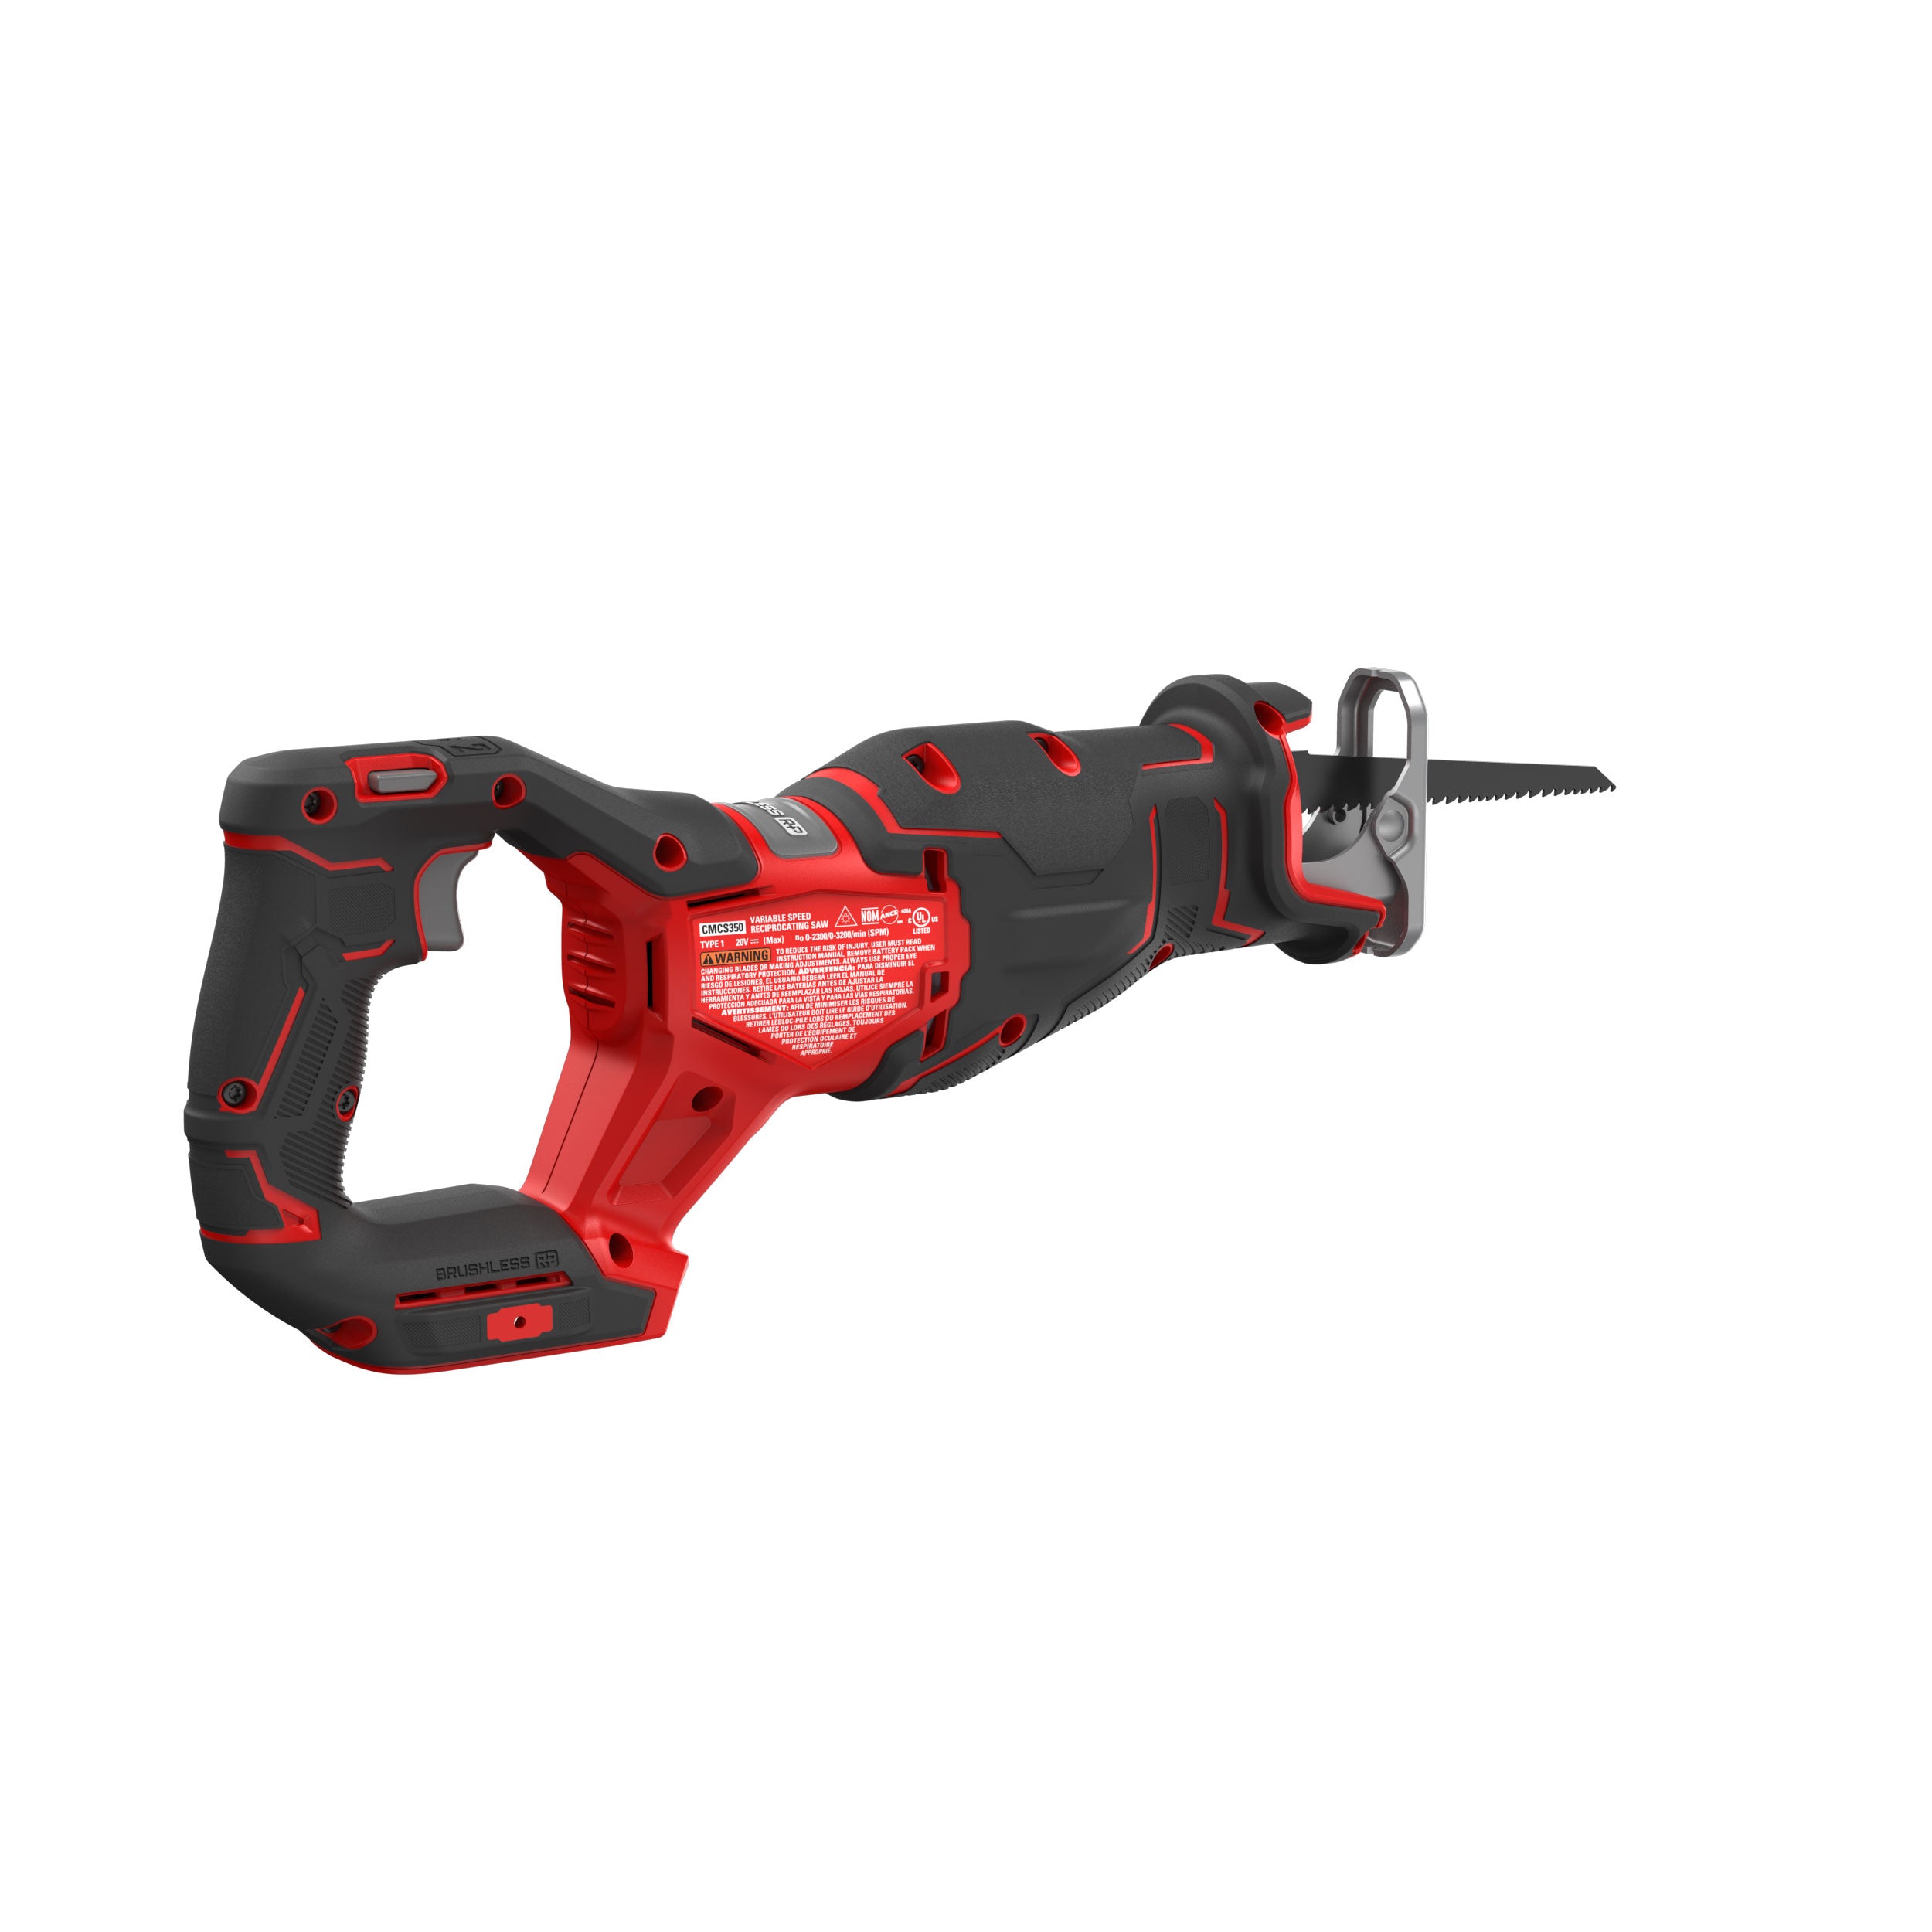 V20* BRUSHLESS RP™ Cordless Reciprocating Saw (Tool Only) | CRAFTSMAN